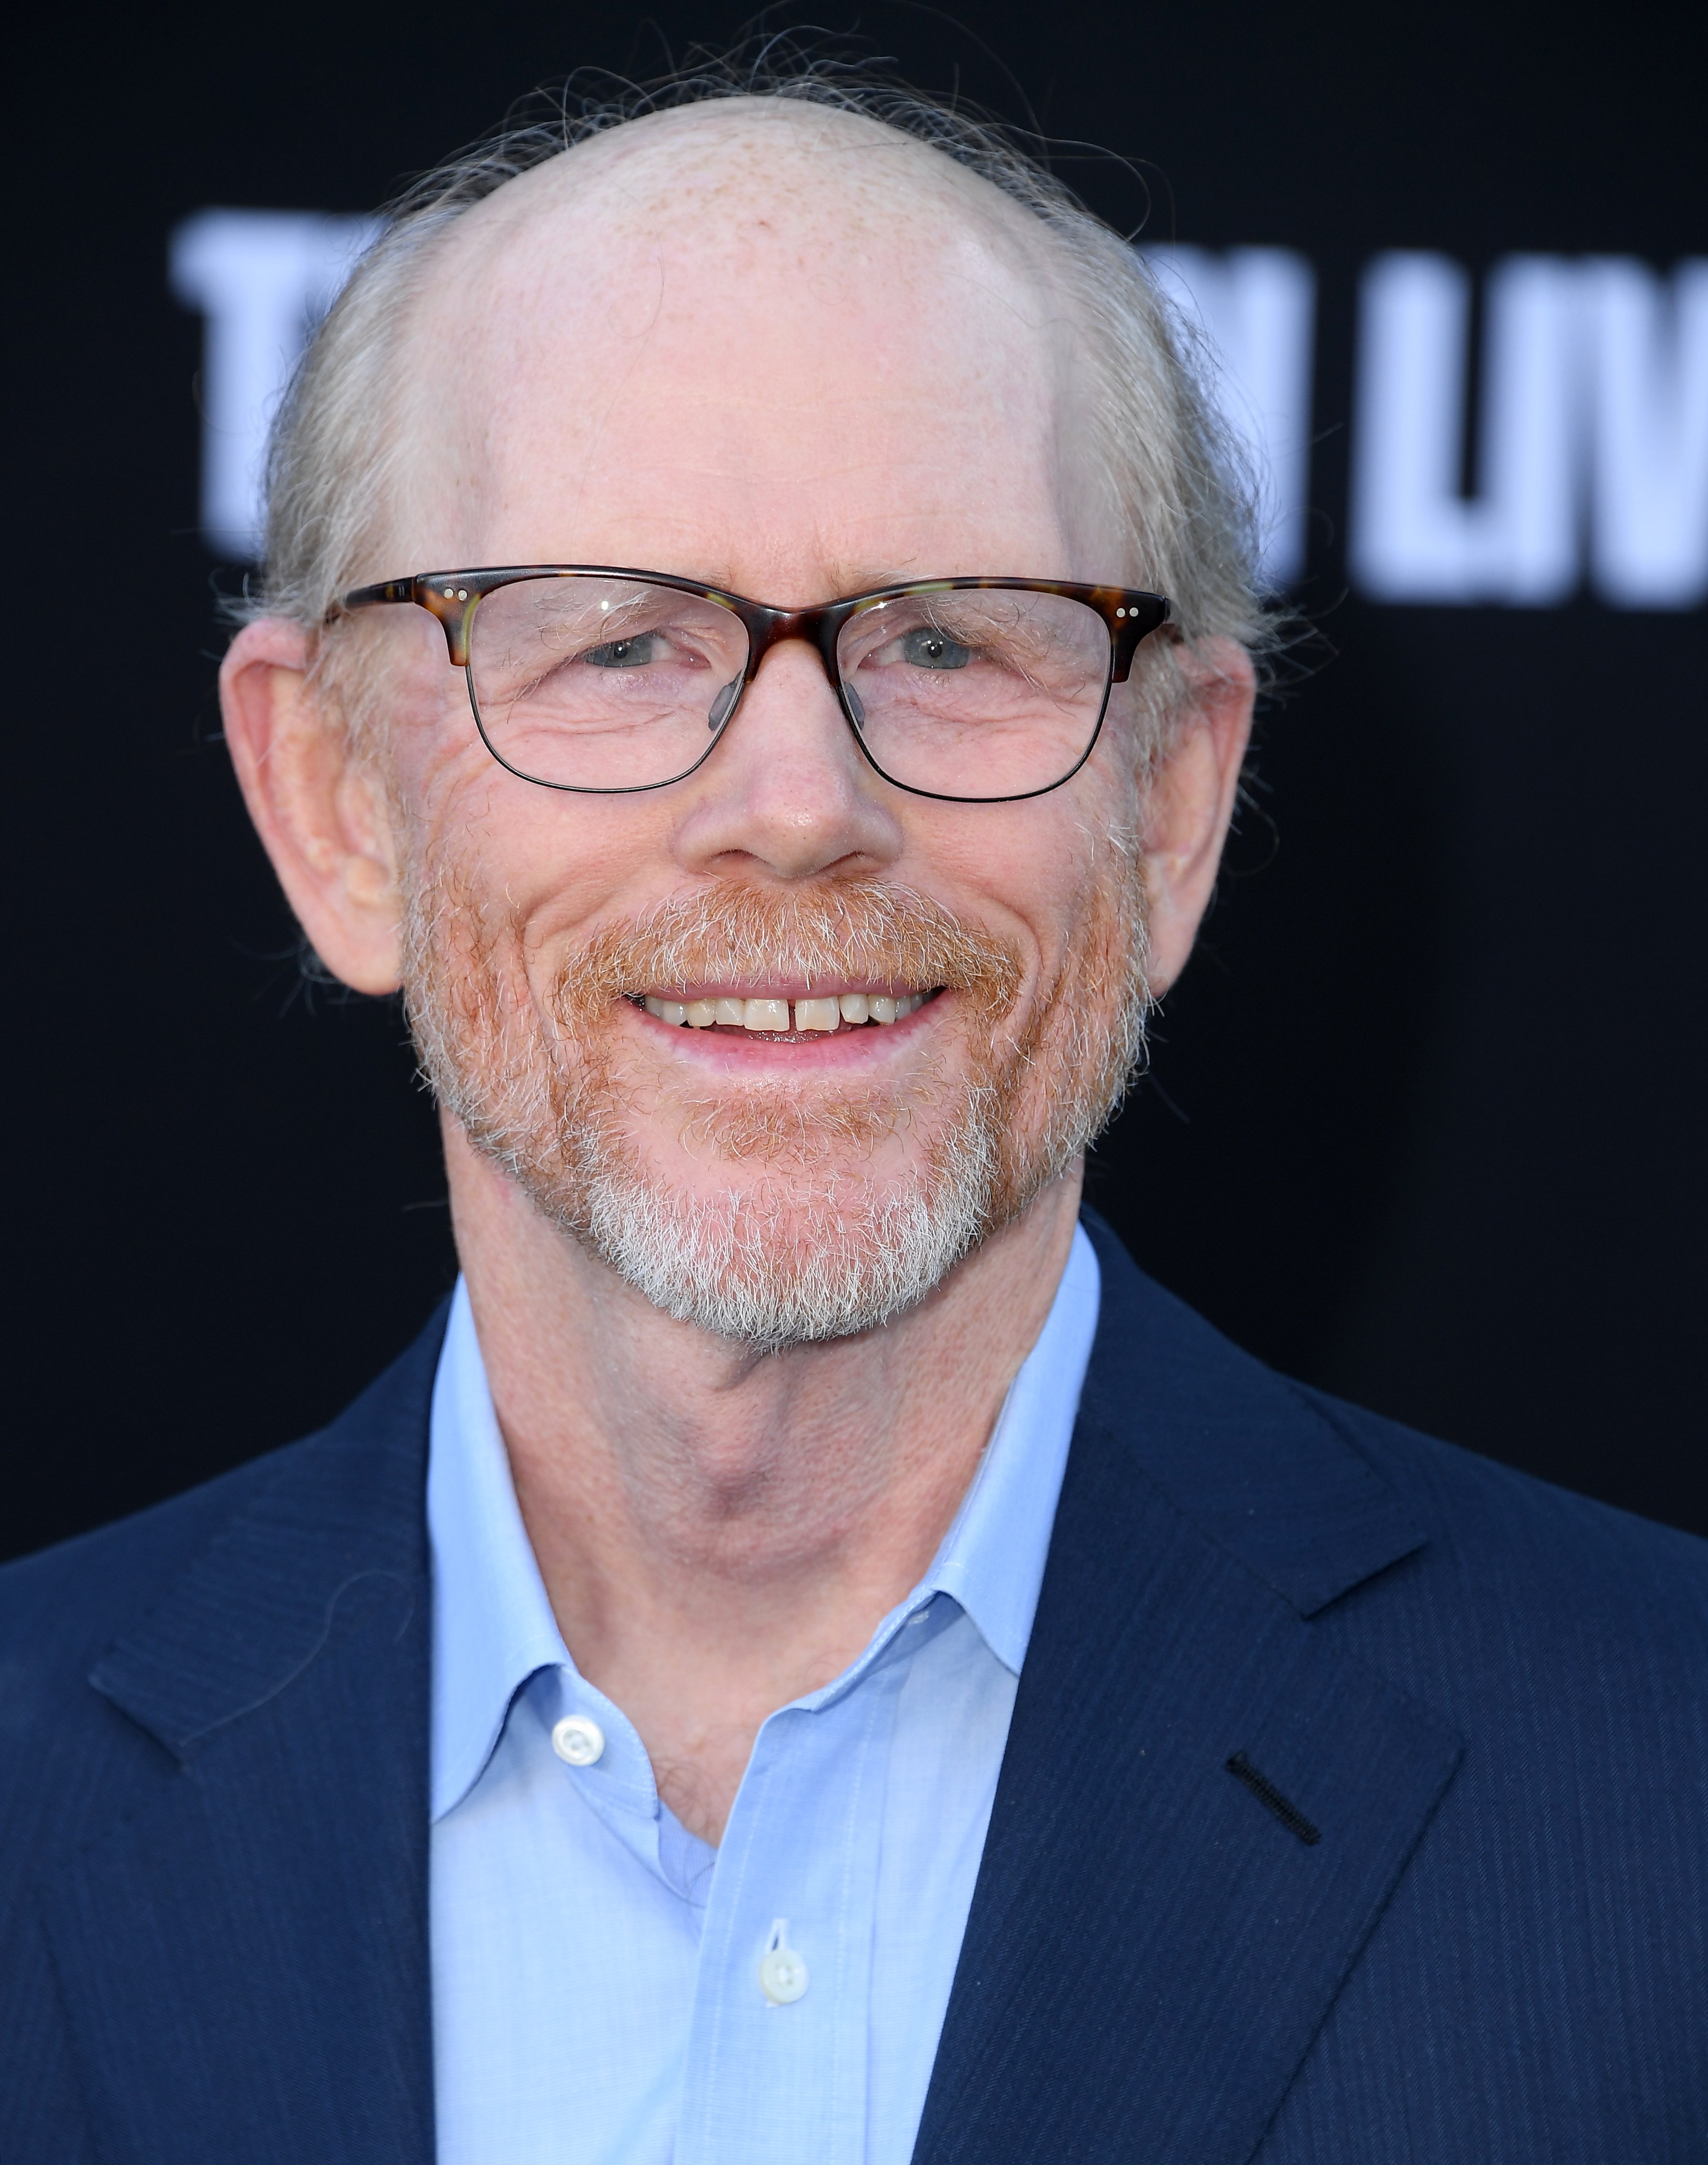 Ron Howard arrives at the Premiere Of Prime Video's "Thirteen Lives" at Westwood Village Theater on July 28, 2022, in Los Angeles, California. | Source: Getty Images